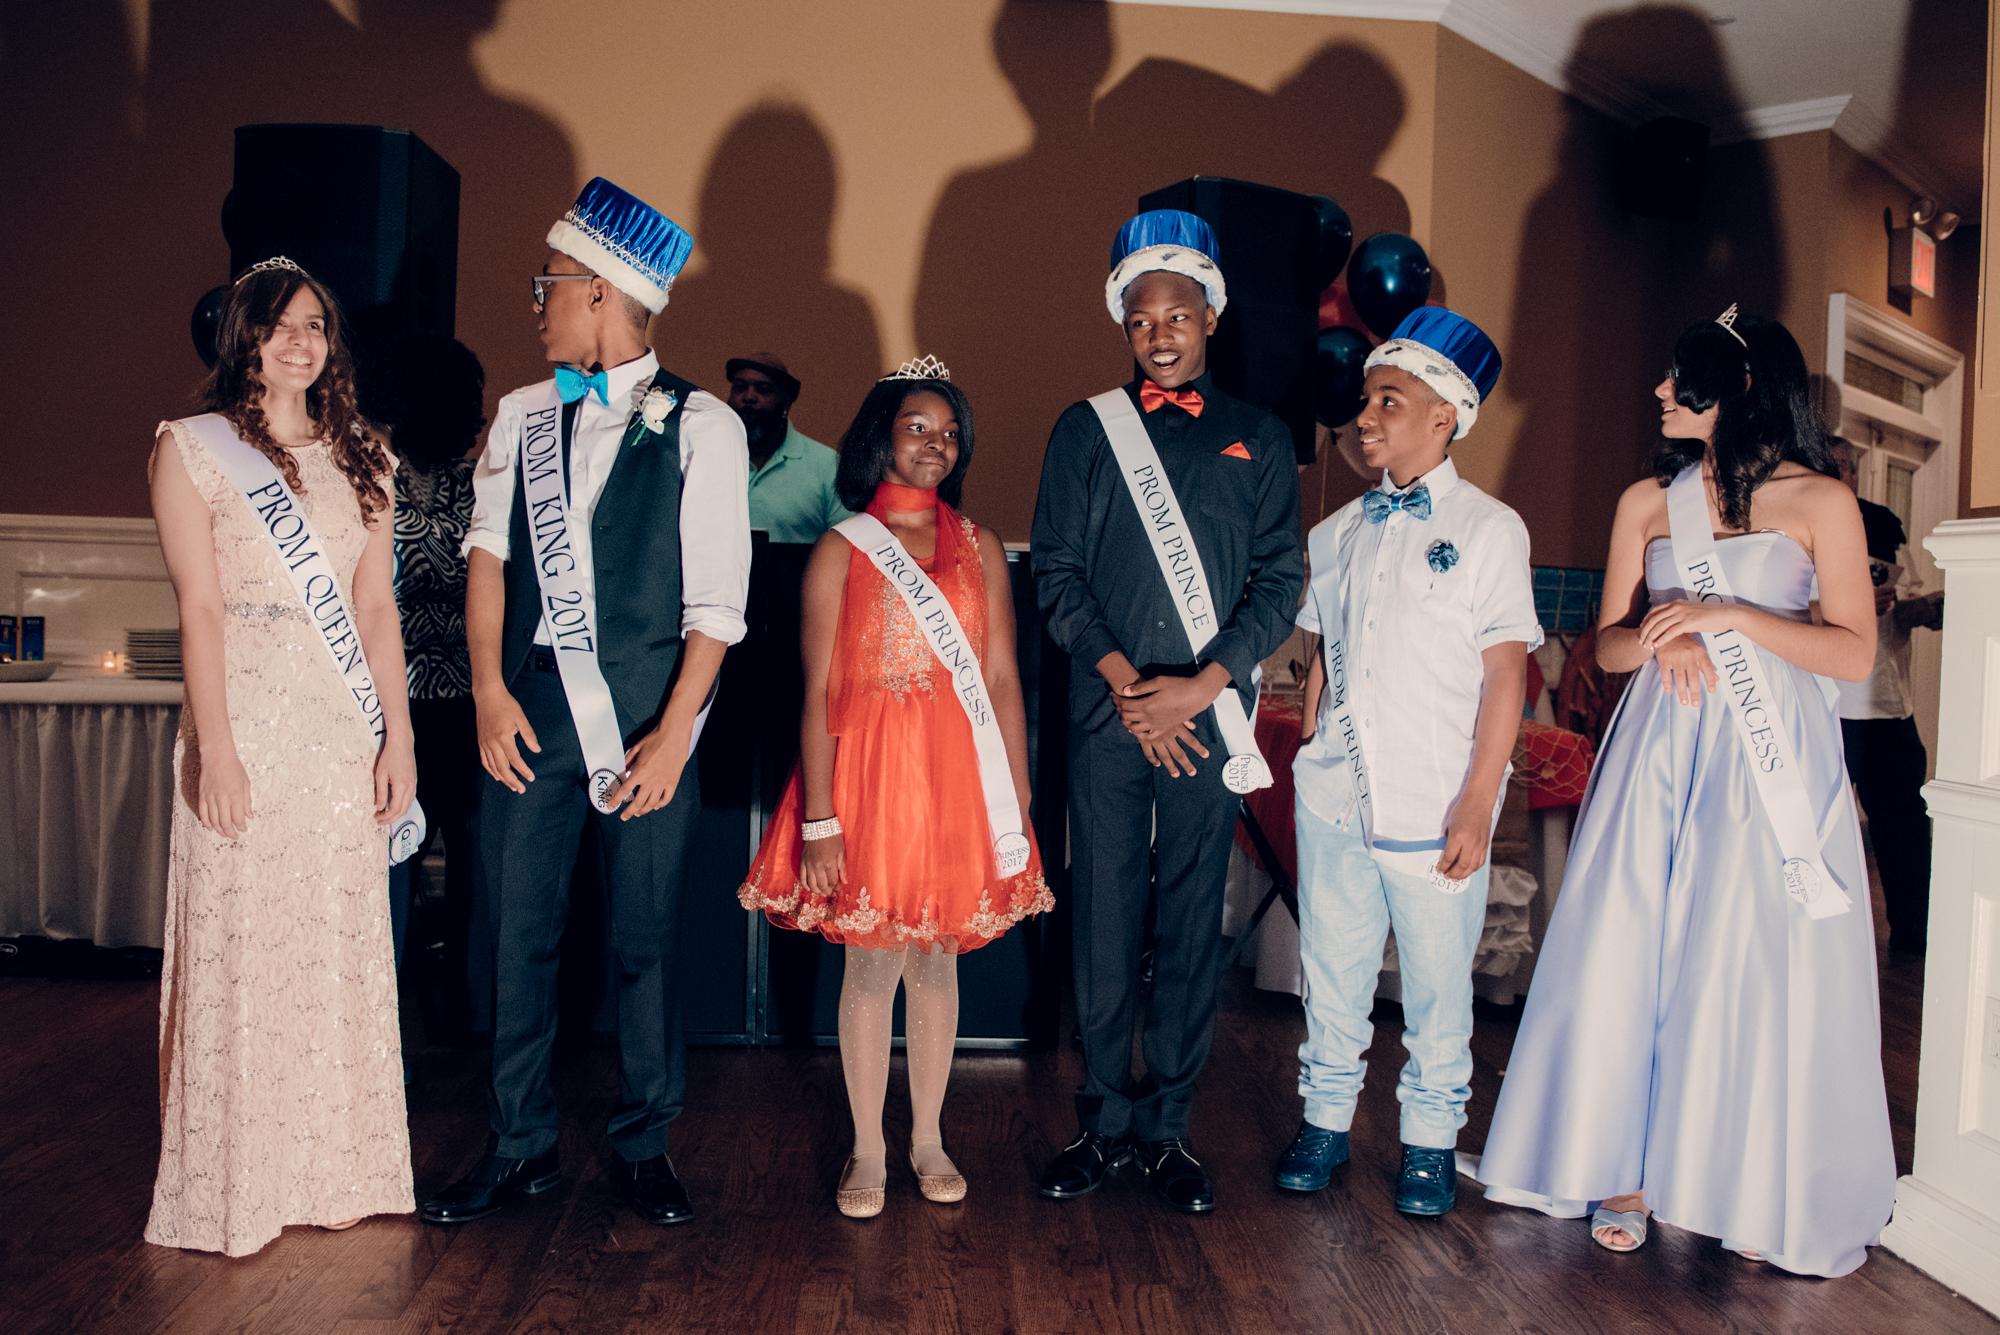 The prom king and queen with their court of 2 princesses and princes